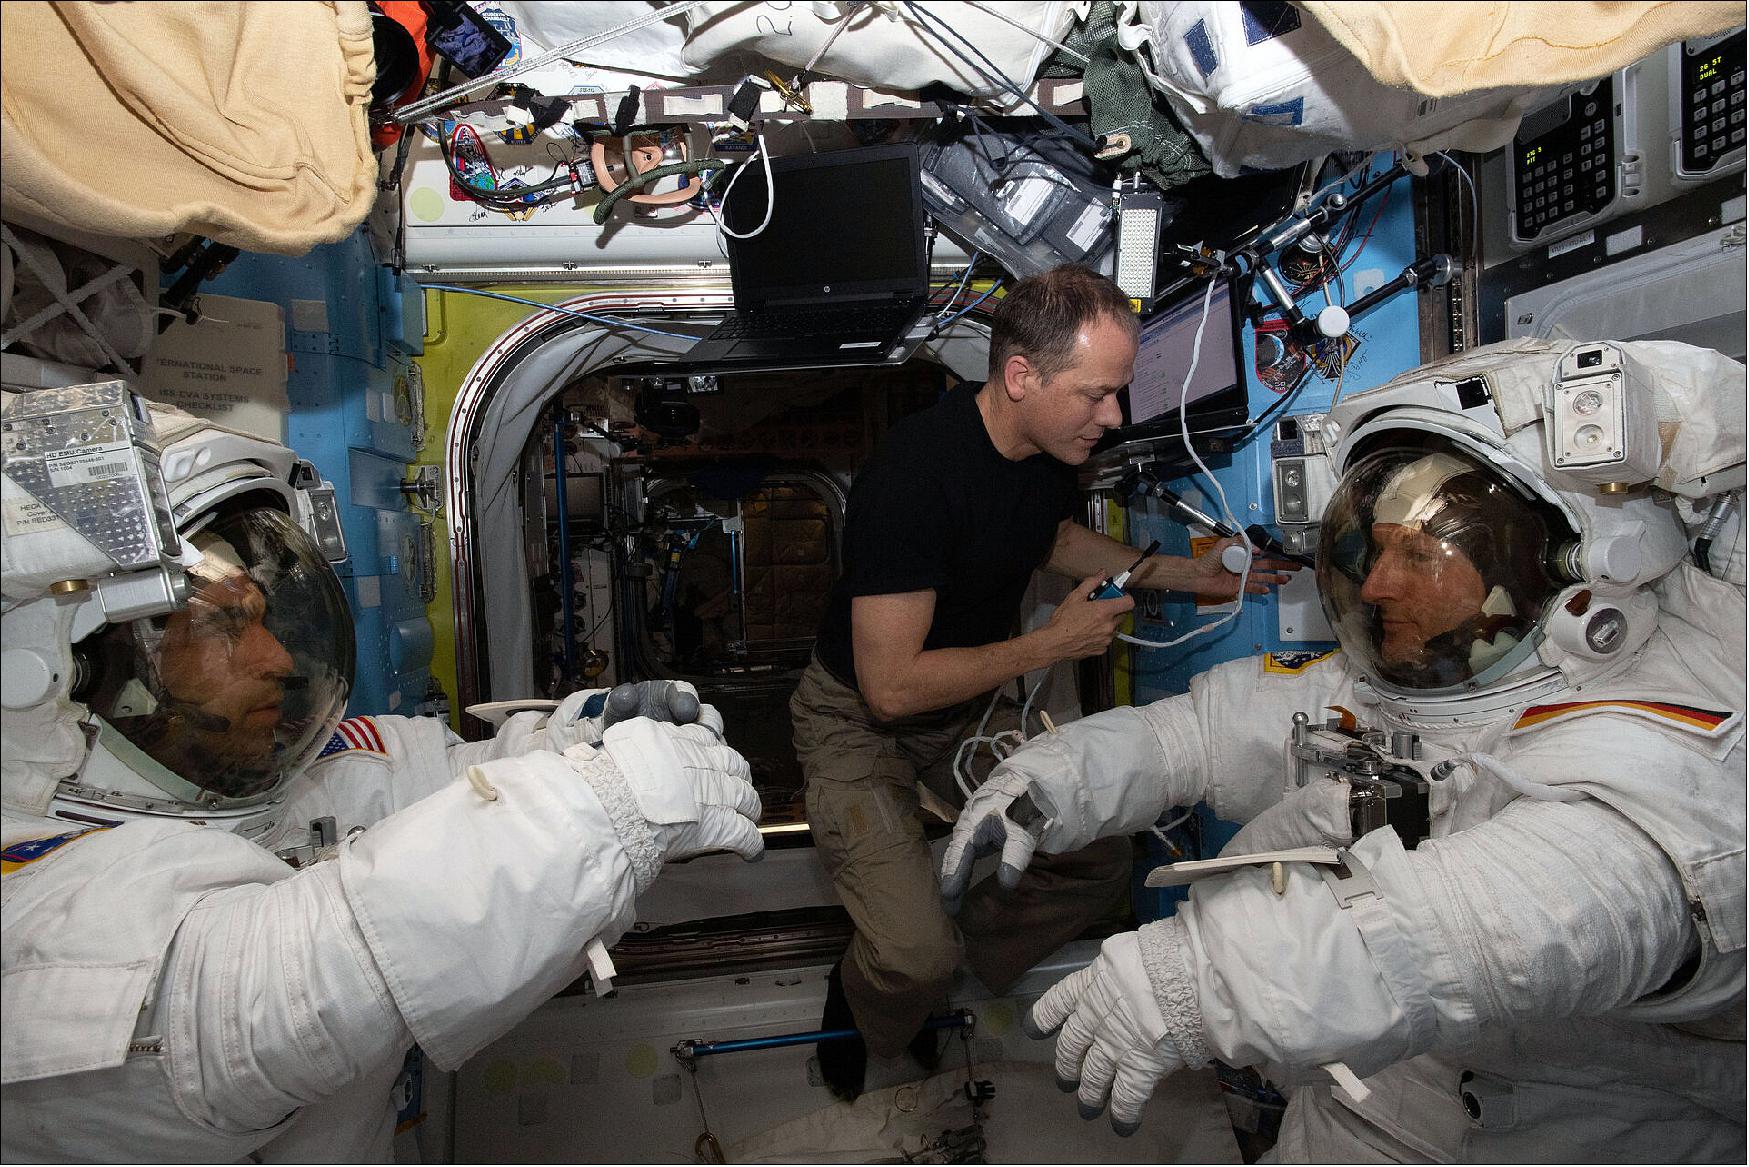 Figure 12: NASA astronaut Raja Chari (left) and ESA astronaut Matthias Maurer (right) check the fit of their Extravehicular Mobility Unit (EMU) spacesuits ahead of a spacewalk scheduled for 23 March 2022. The pair are helped by NASA astronaut Tom Marshburn (image credit: ESA/NASA)